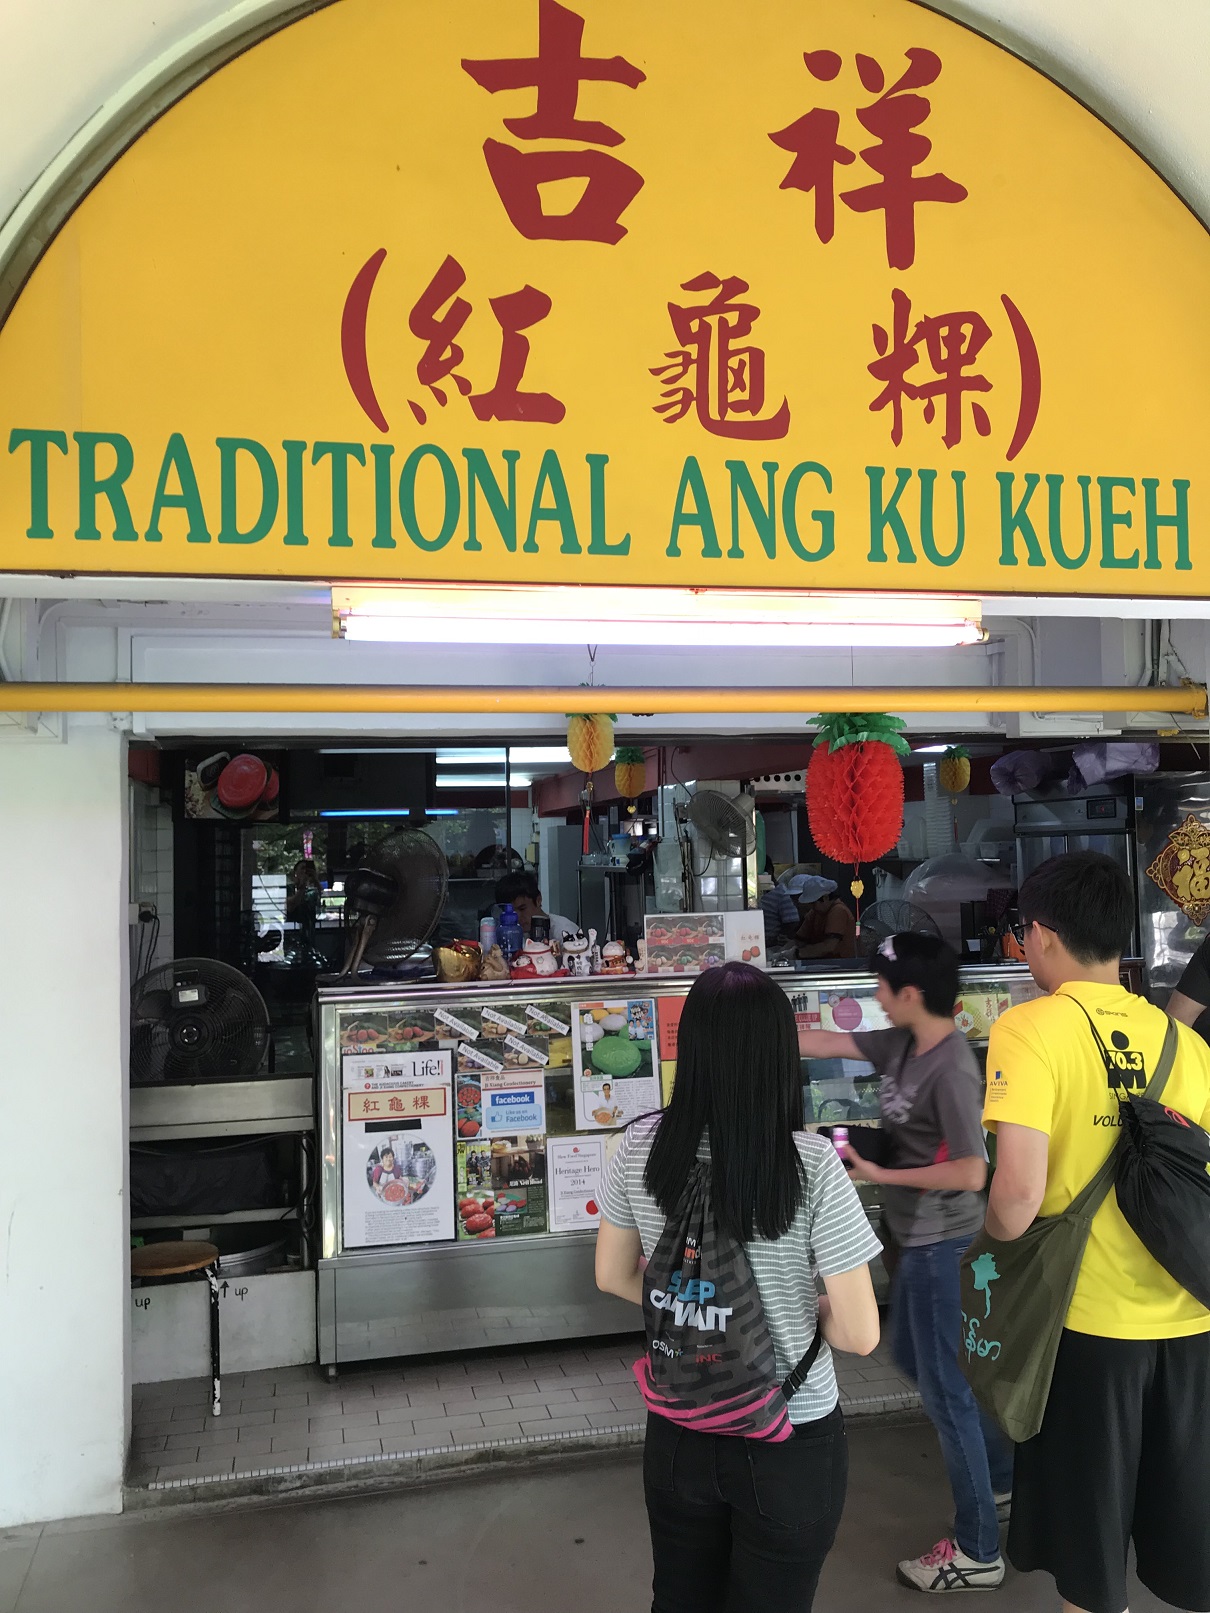 Tried Ang Ku Kueh here, not bad... but not my kind of food.